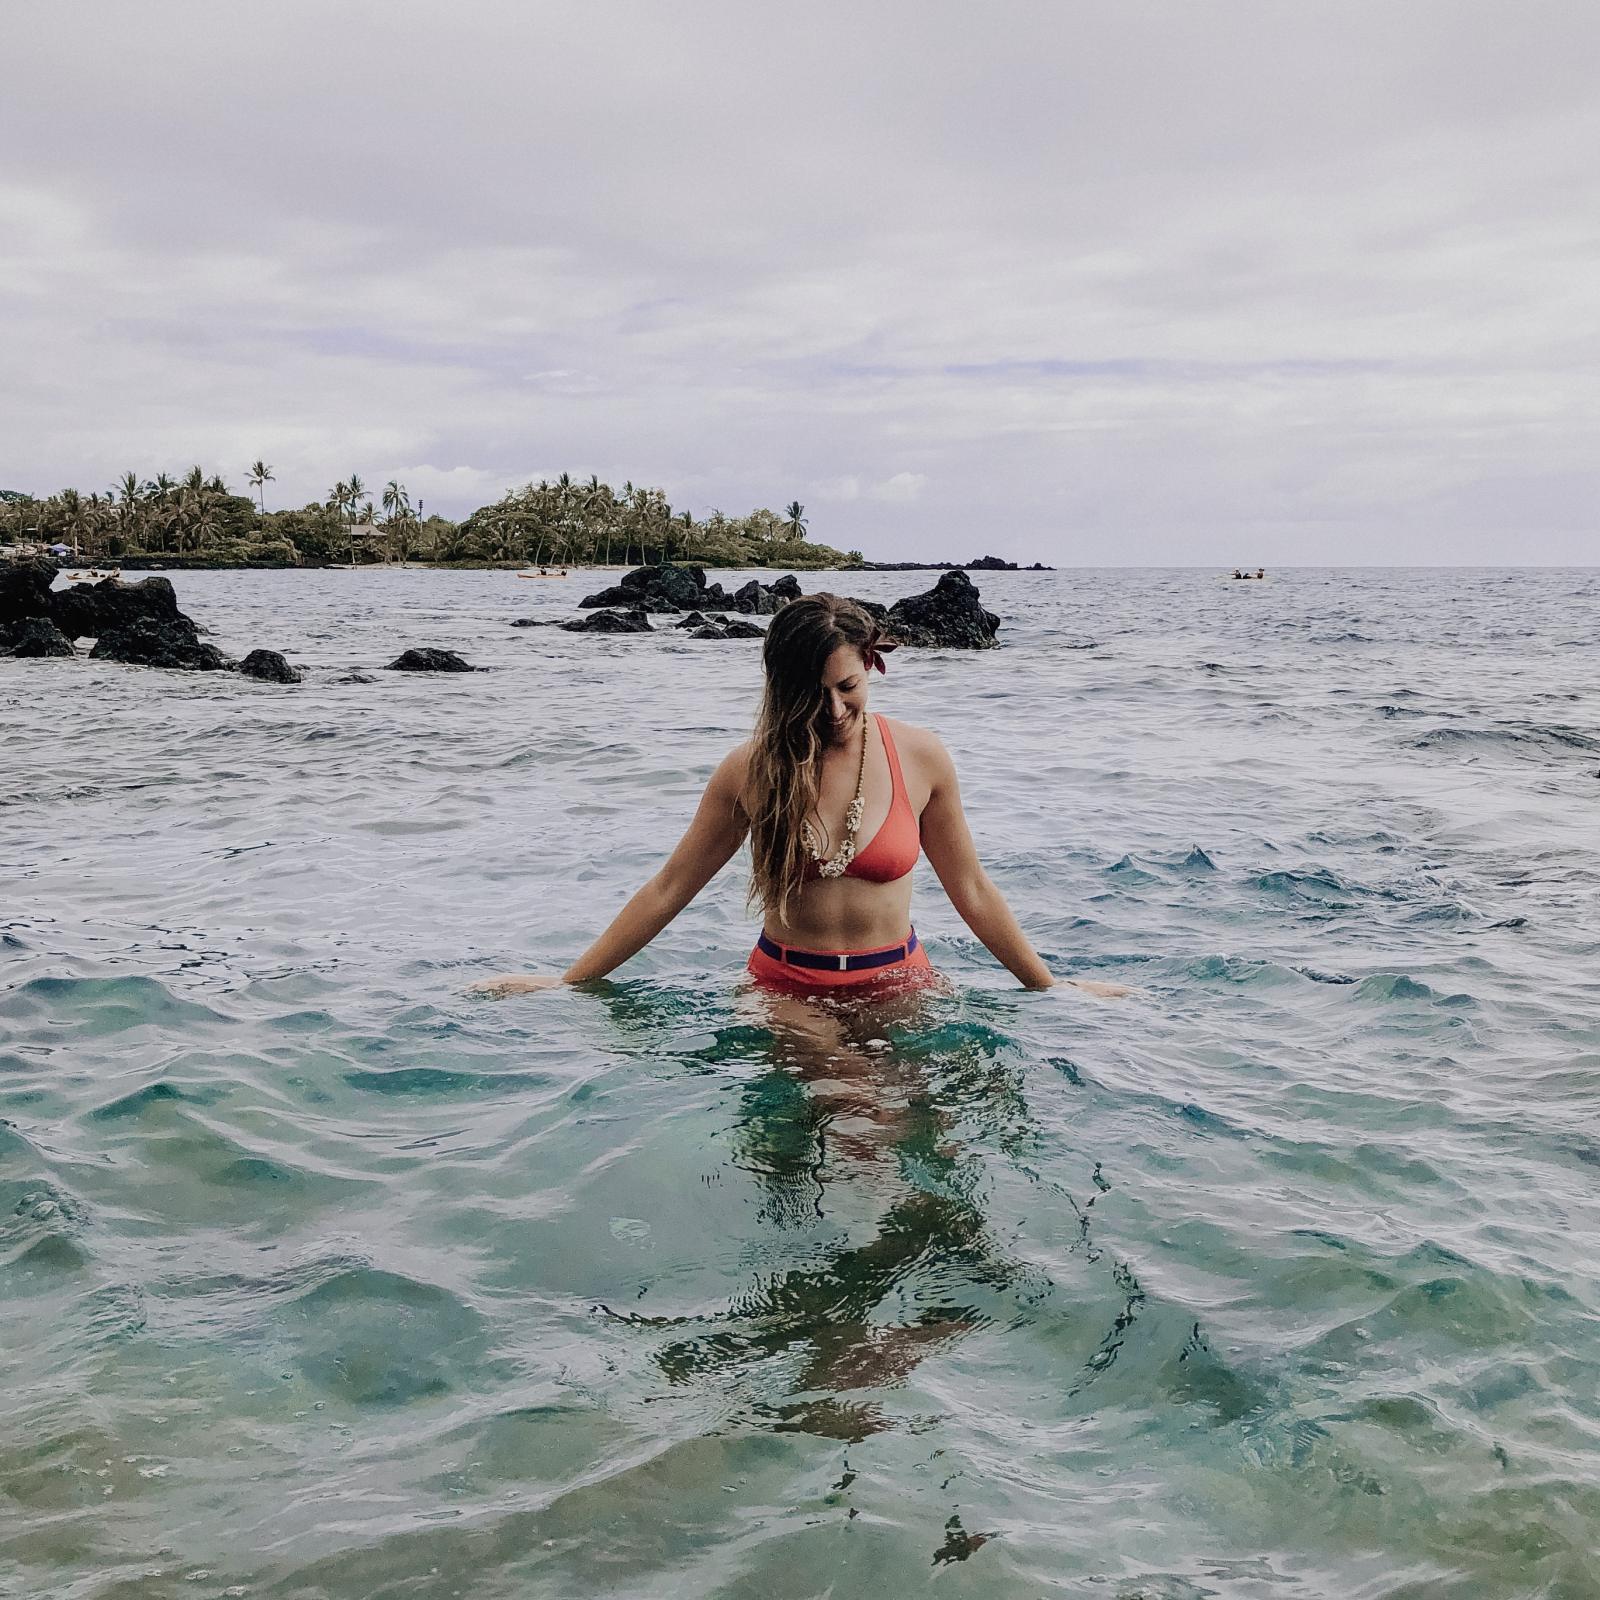 How to Spend a Week on the Big Island of Hawai’i